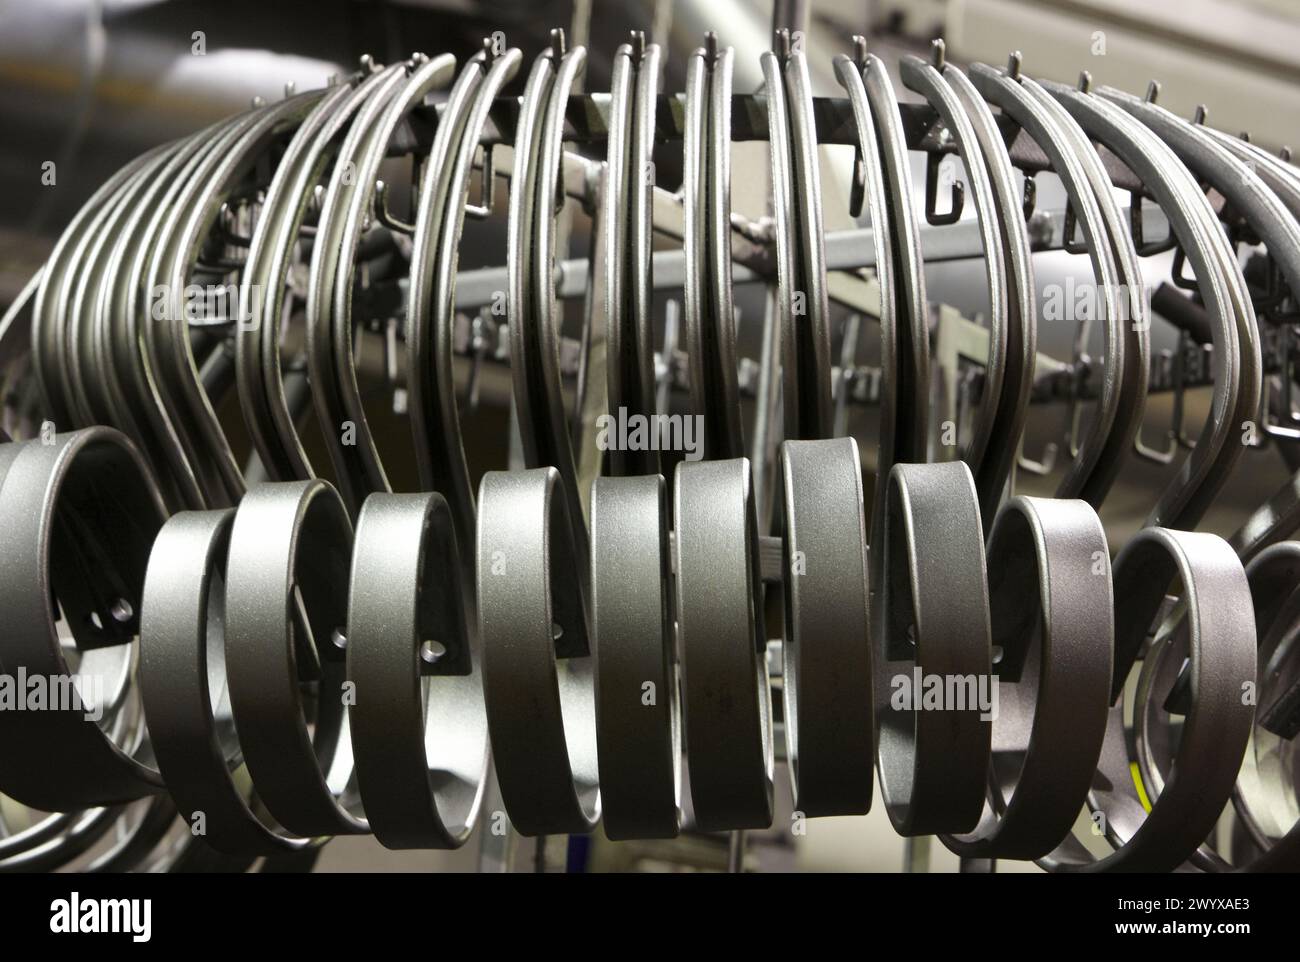 Tines manufacturing, spare parts for farm machinery, metallurgy. Stock Photo